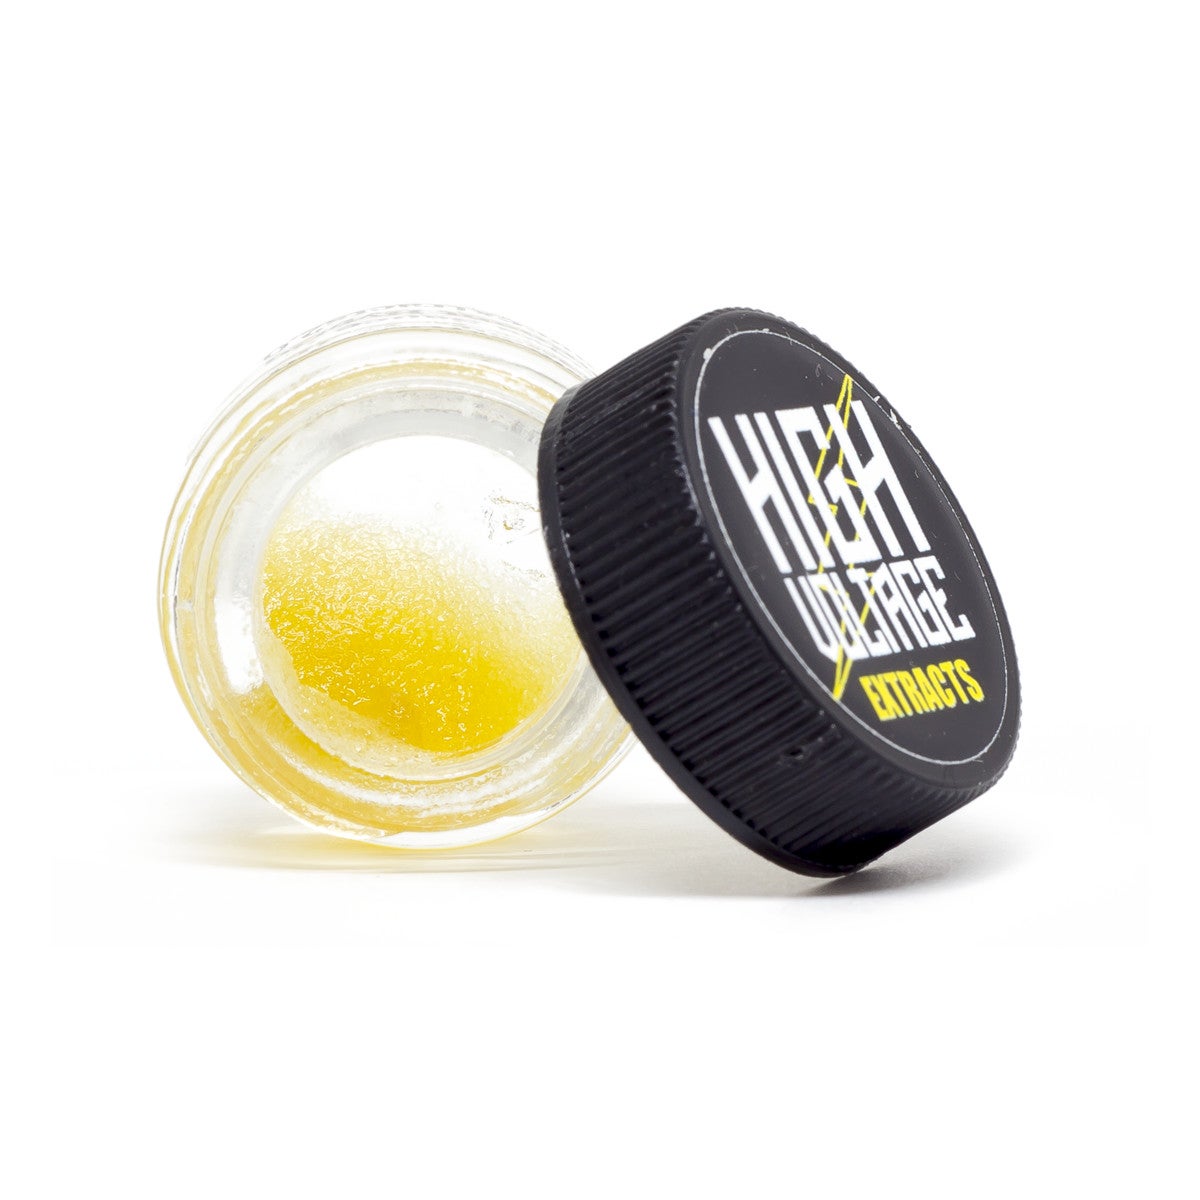 High Voltage Extracts - Papaya Punch Sauce 1Gram - CannaCured.